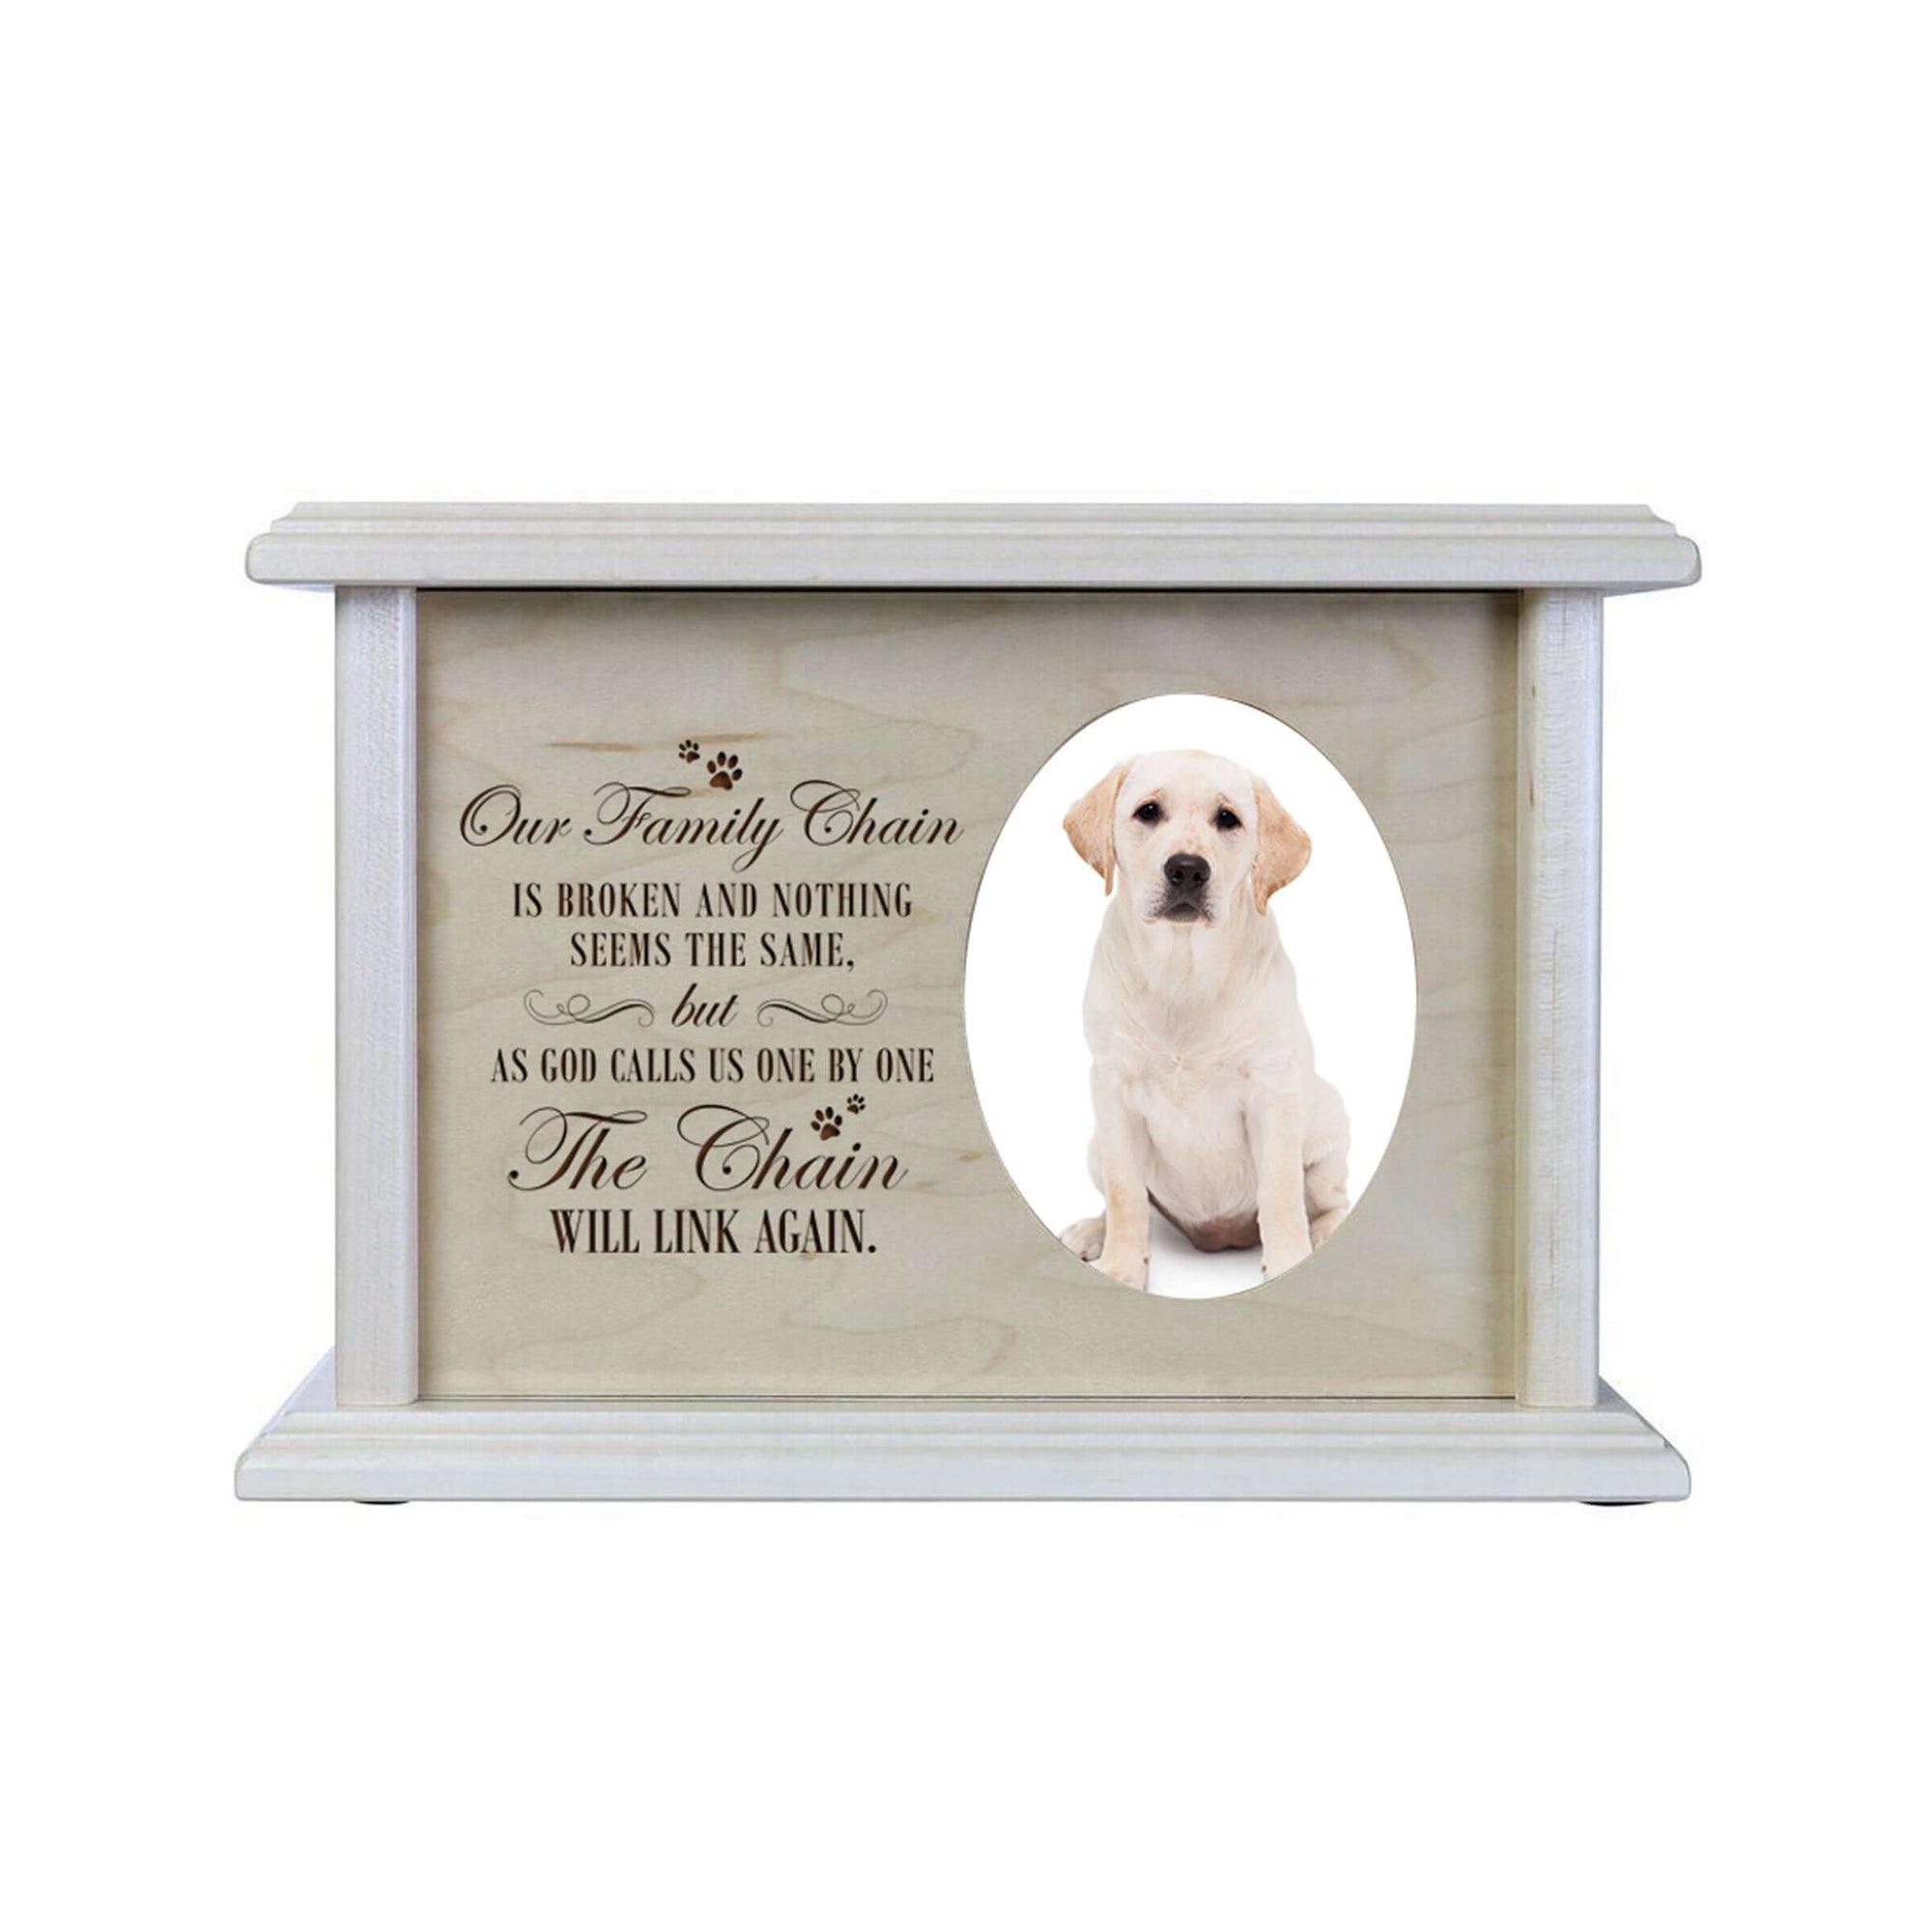 Pet Memorial Picture Cremation Urn Box for Dog or Cat - Our Family Chain Is Broken